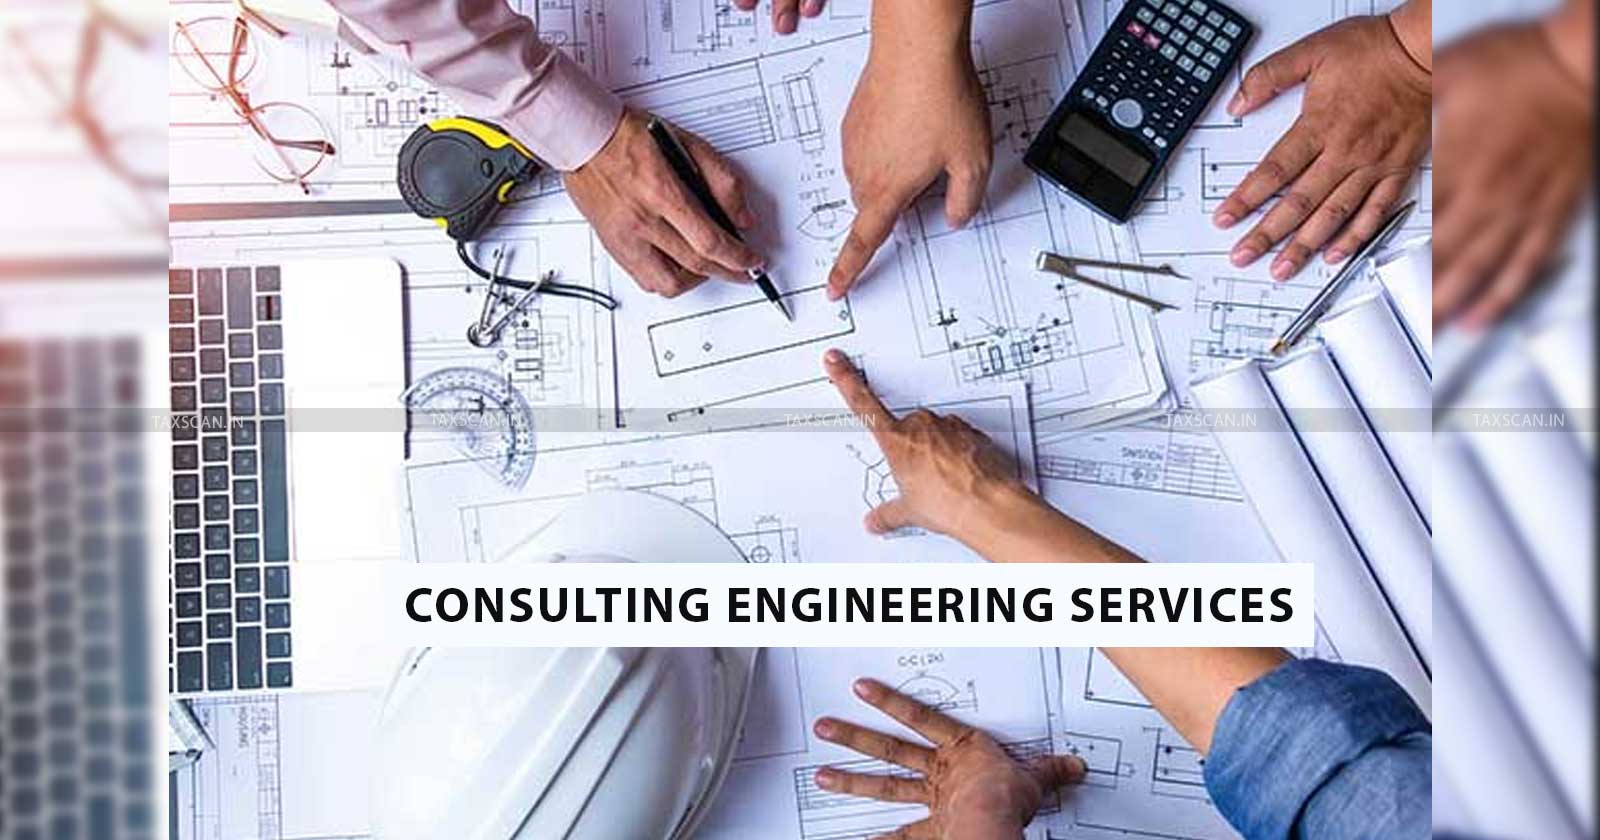 Consulting Engineers service - CESTAT - Service Tax - Bangalore bench - taxscan